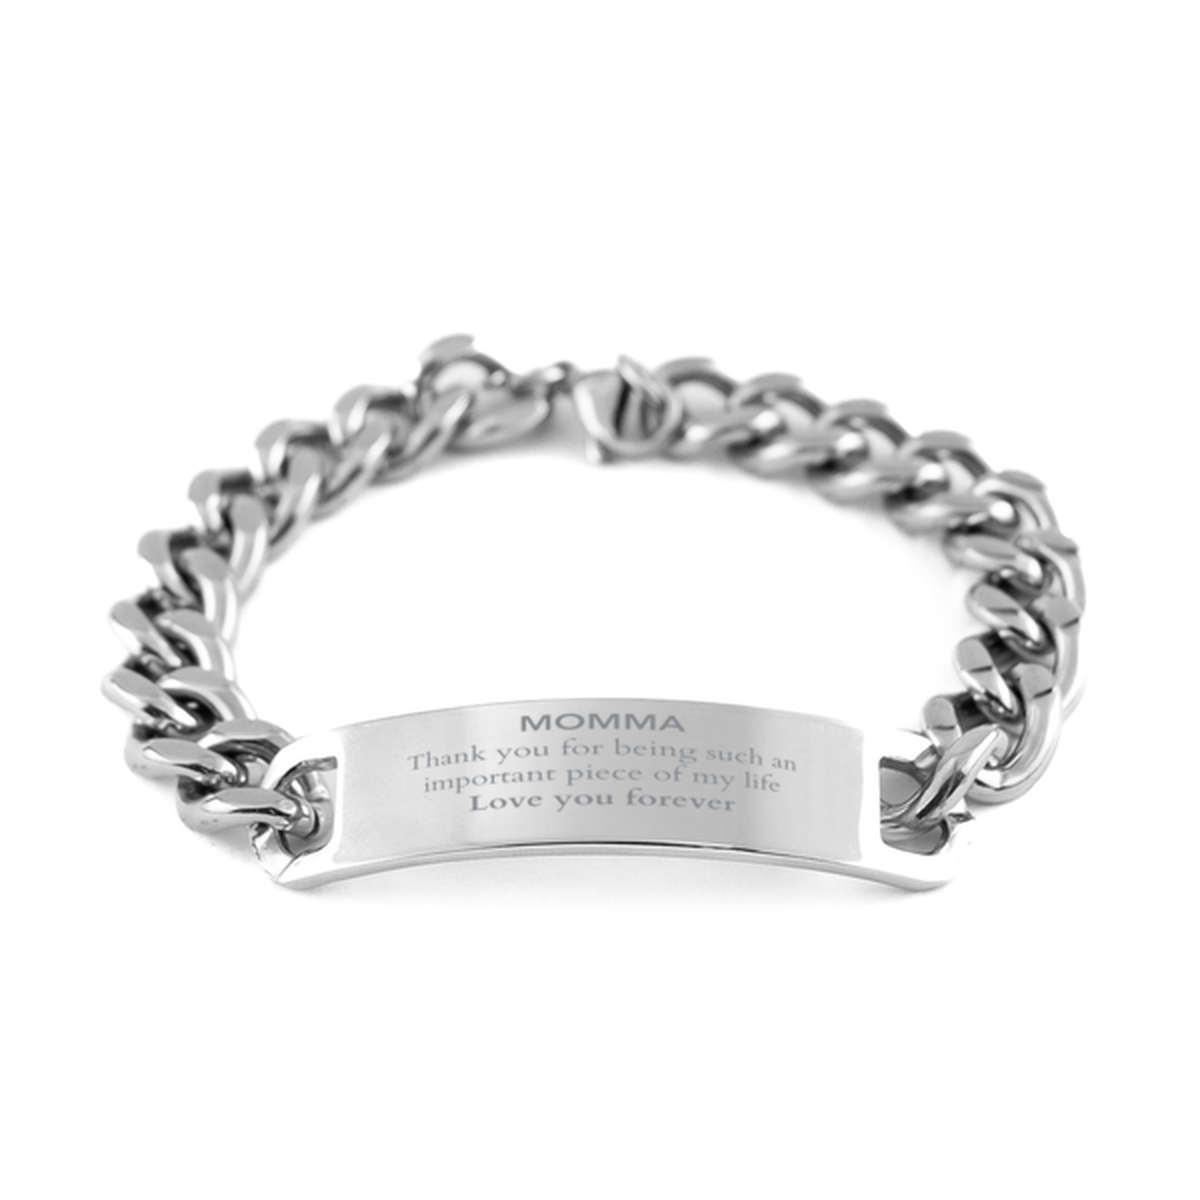 Appropriate Momma Cuban Chain Stainless Steel Bracelet Epic Birthday Gifts for Momma Thank you for being such an important piece of my life Momma Christmas Mothers Fathers Day